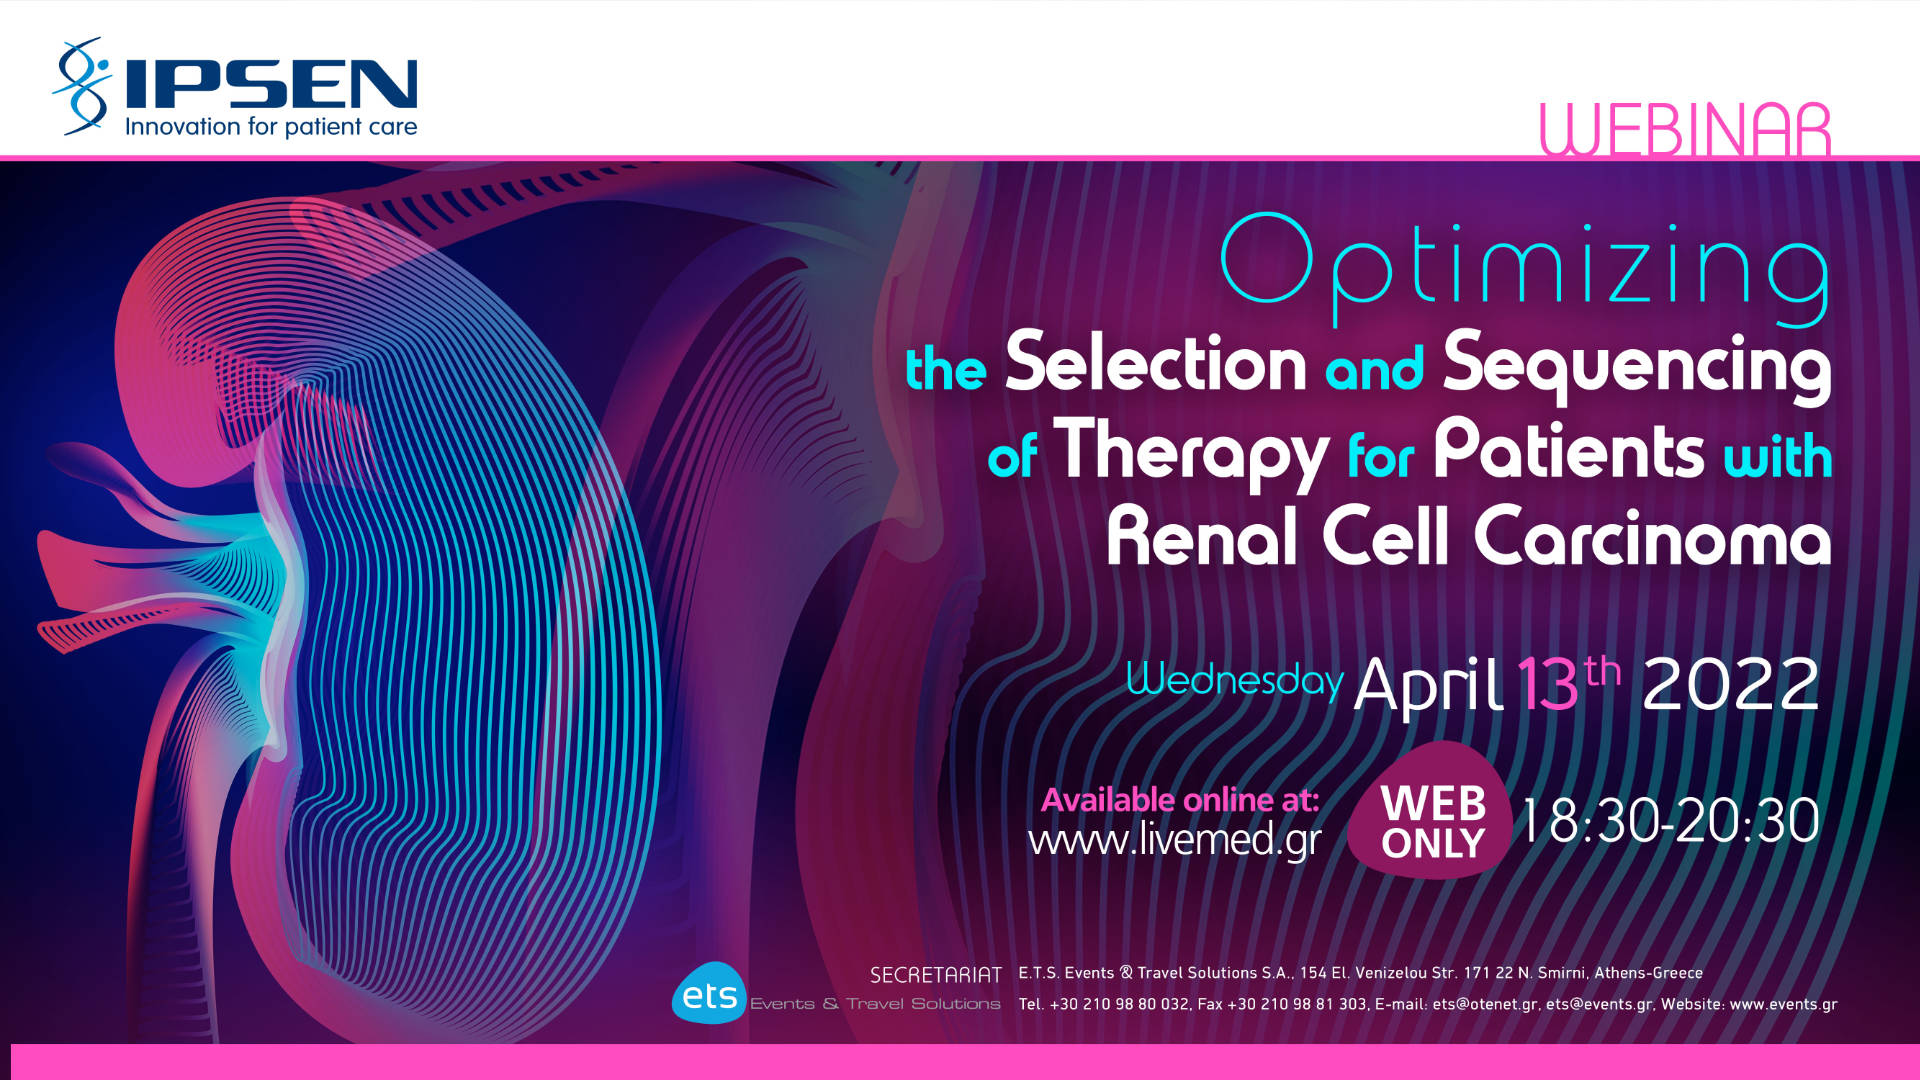 Optimizing the Selection and Sequencing of Therapy for Patients with Renal Cell Carcinoma